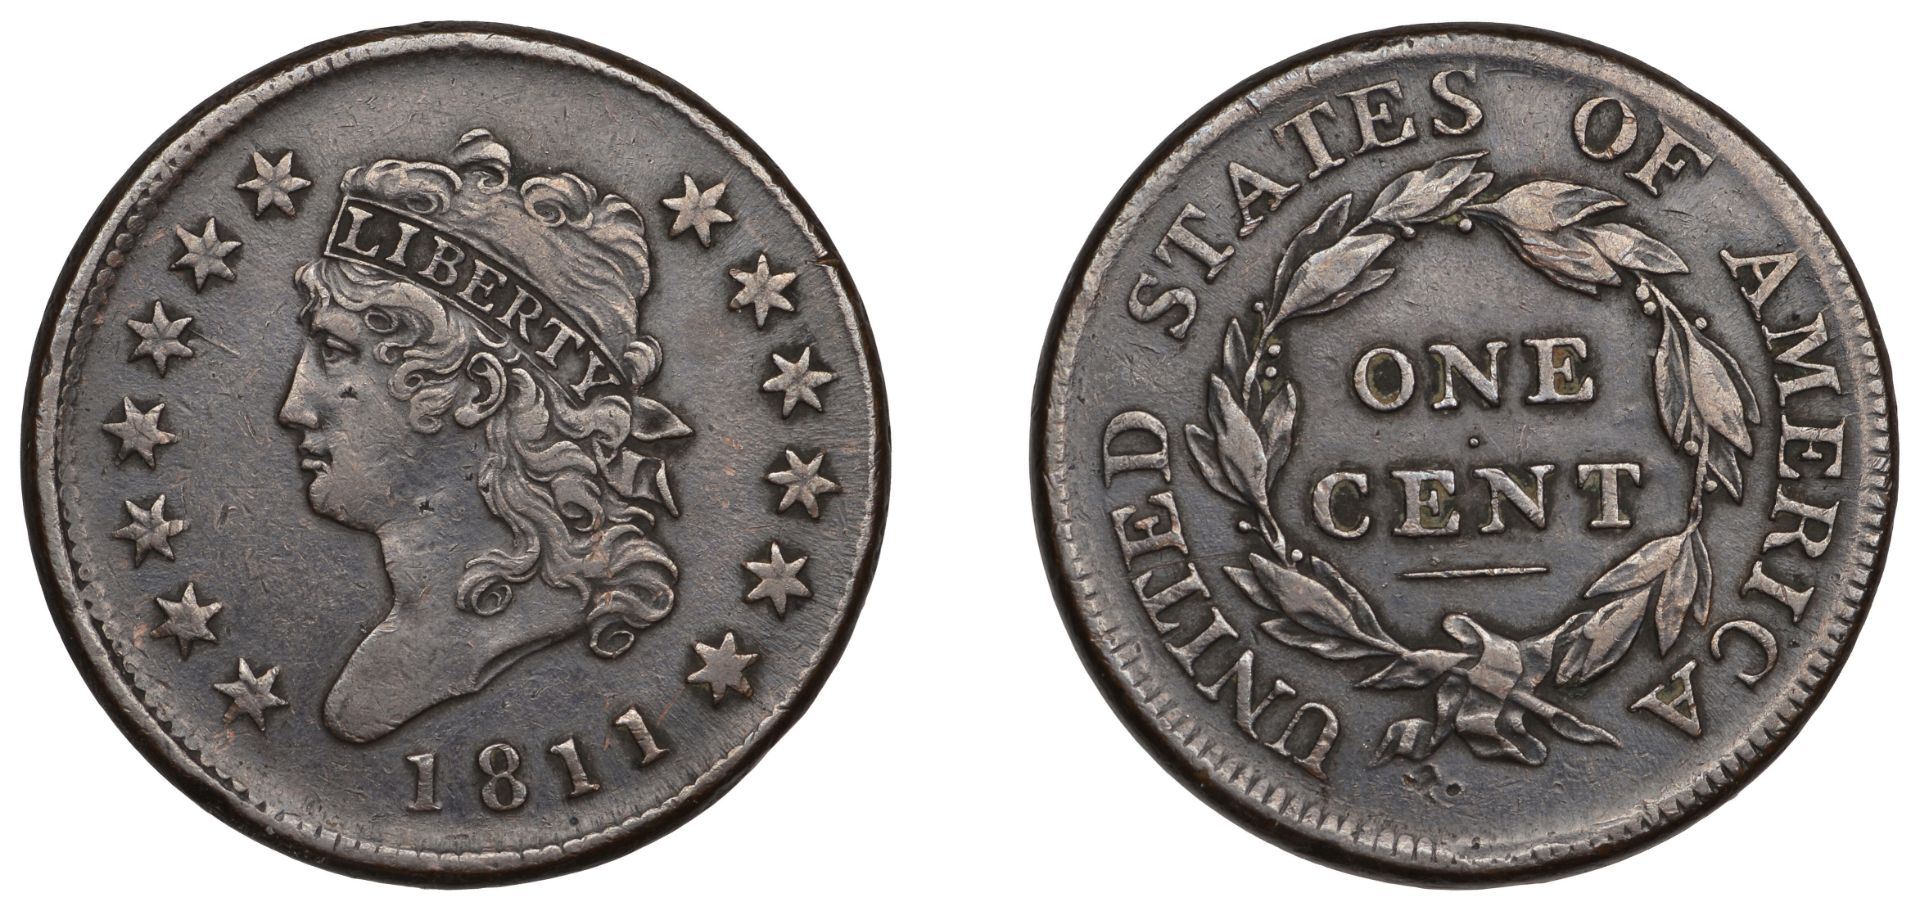 United States of America, Large Cent, 1811. A few minor marks, otherwise very fine Â£200-Â£260